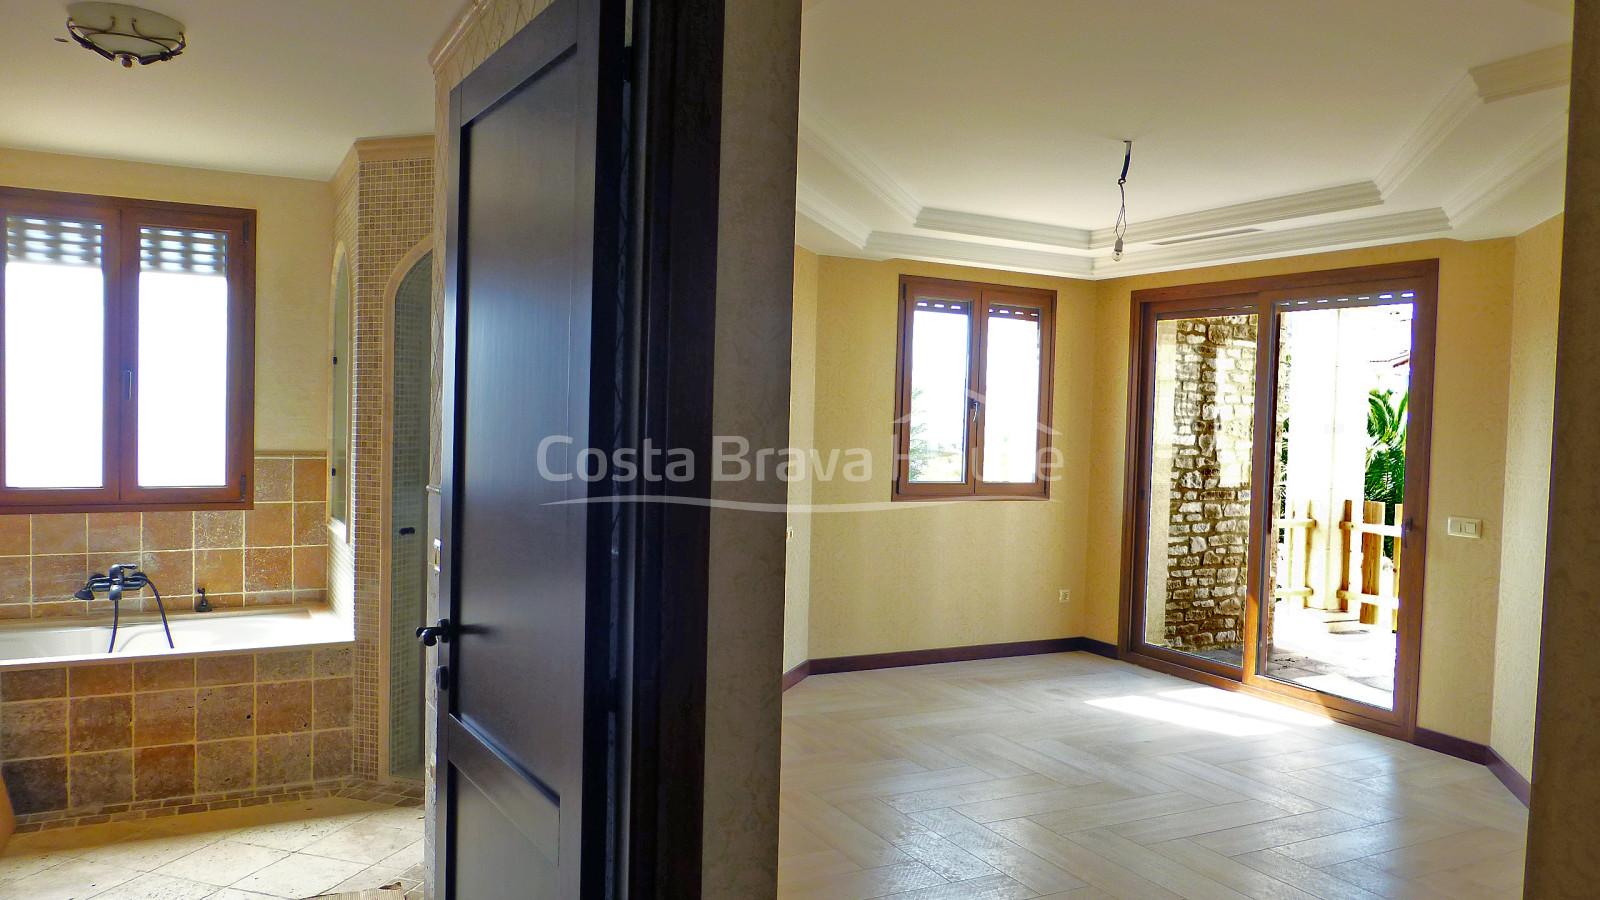 Luxury house with private jetty for sale in Empuriabrava